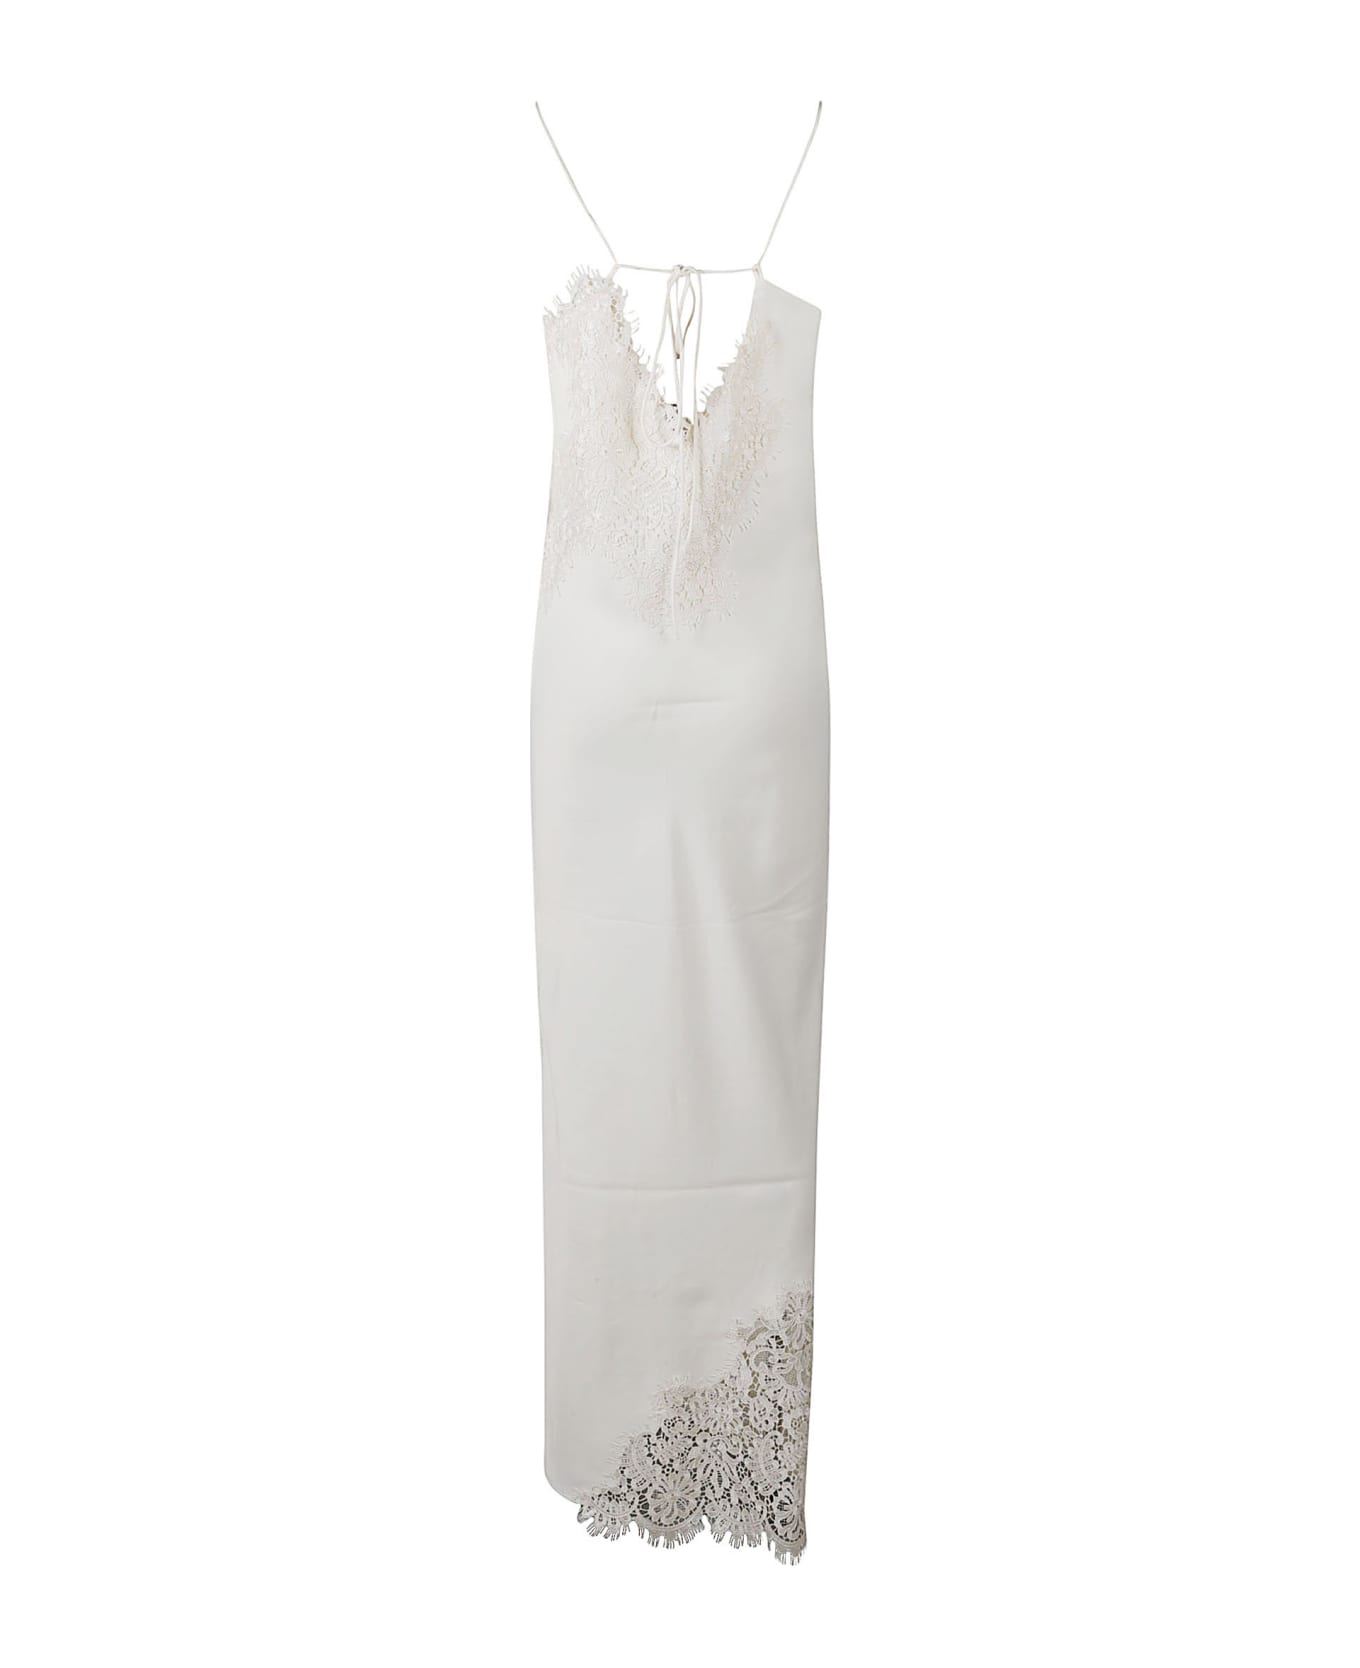 Róhe Lace Paneled Embroidered Long Dress - Cream